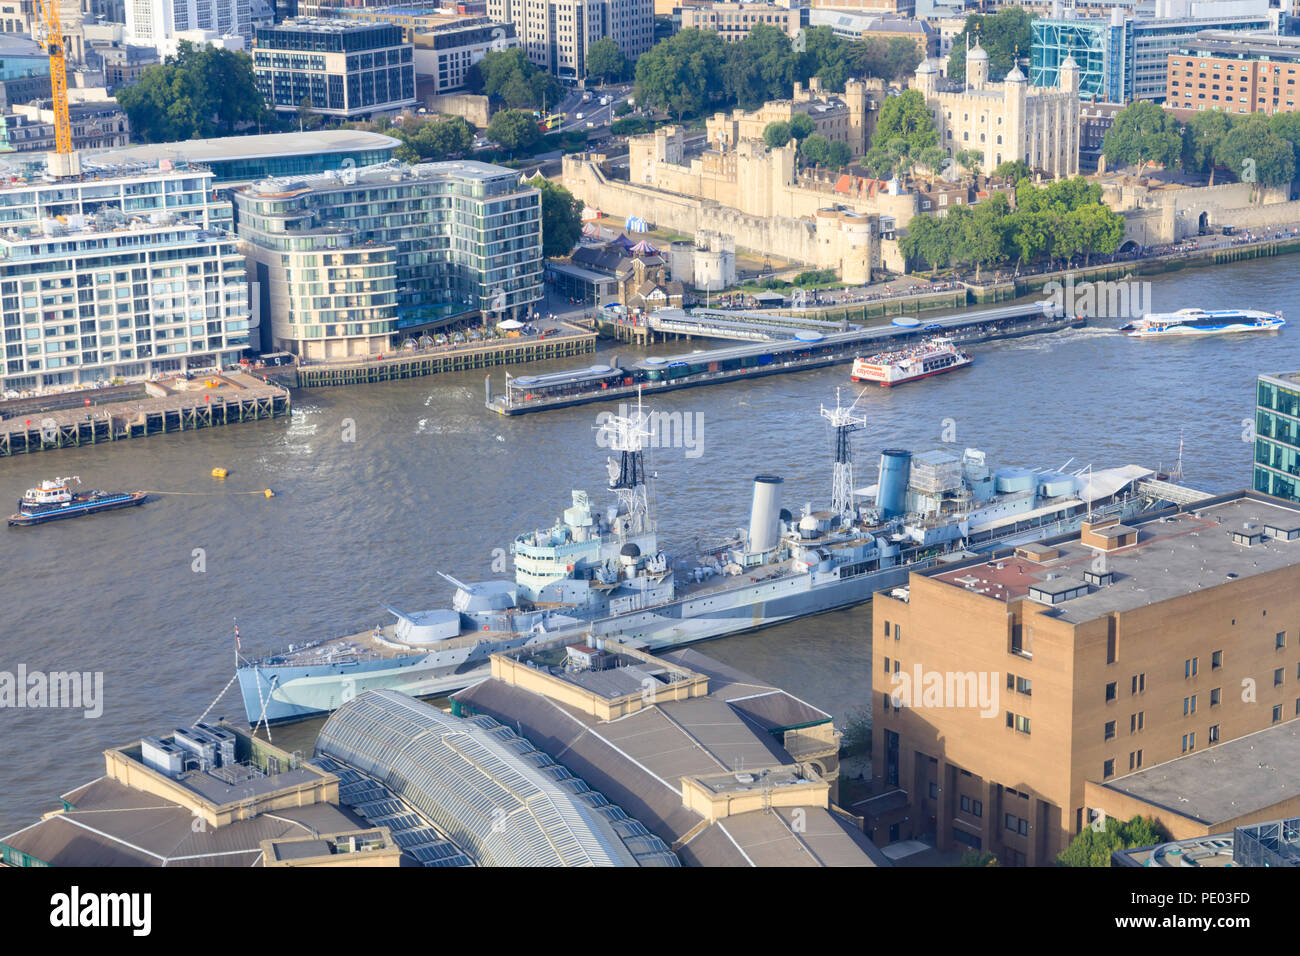 Historic Second World War British Navy battleship, HMS Belfast, moored on the River Thames. Taken from above at the Shard 32 floor. London, England Stock Photo